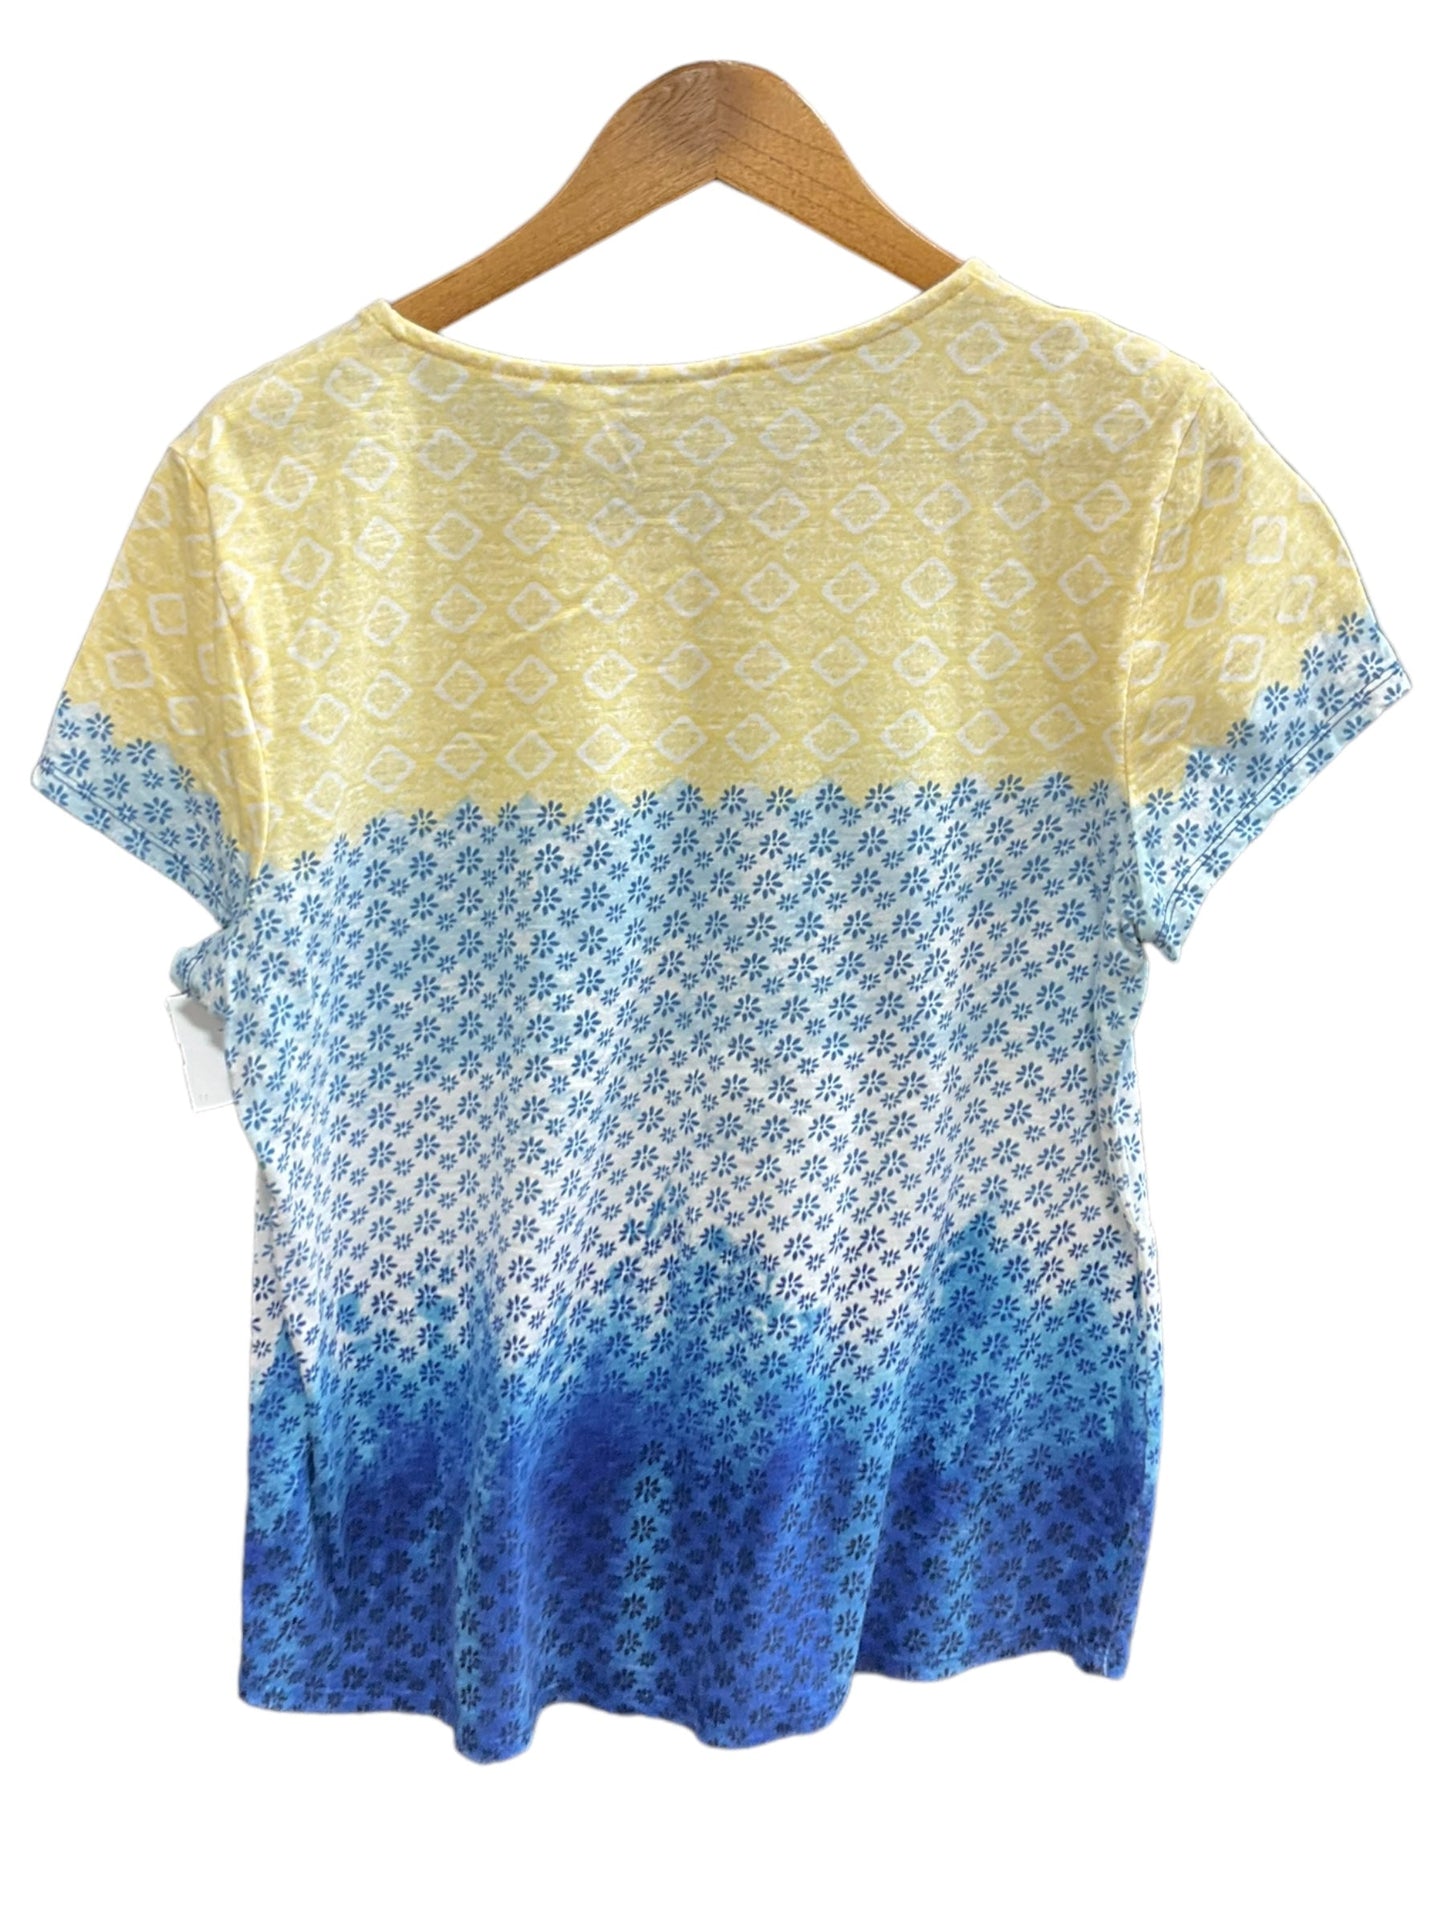 Blue & Yellow Top Short Sleeve Basic Chicos, Size L